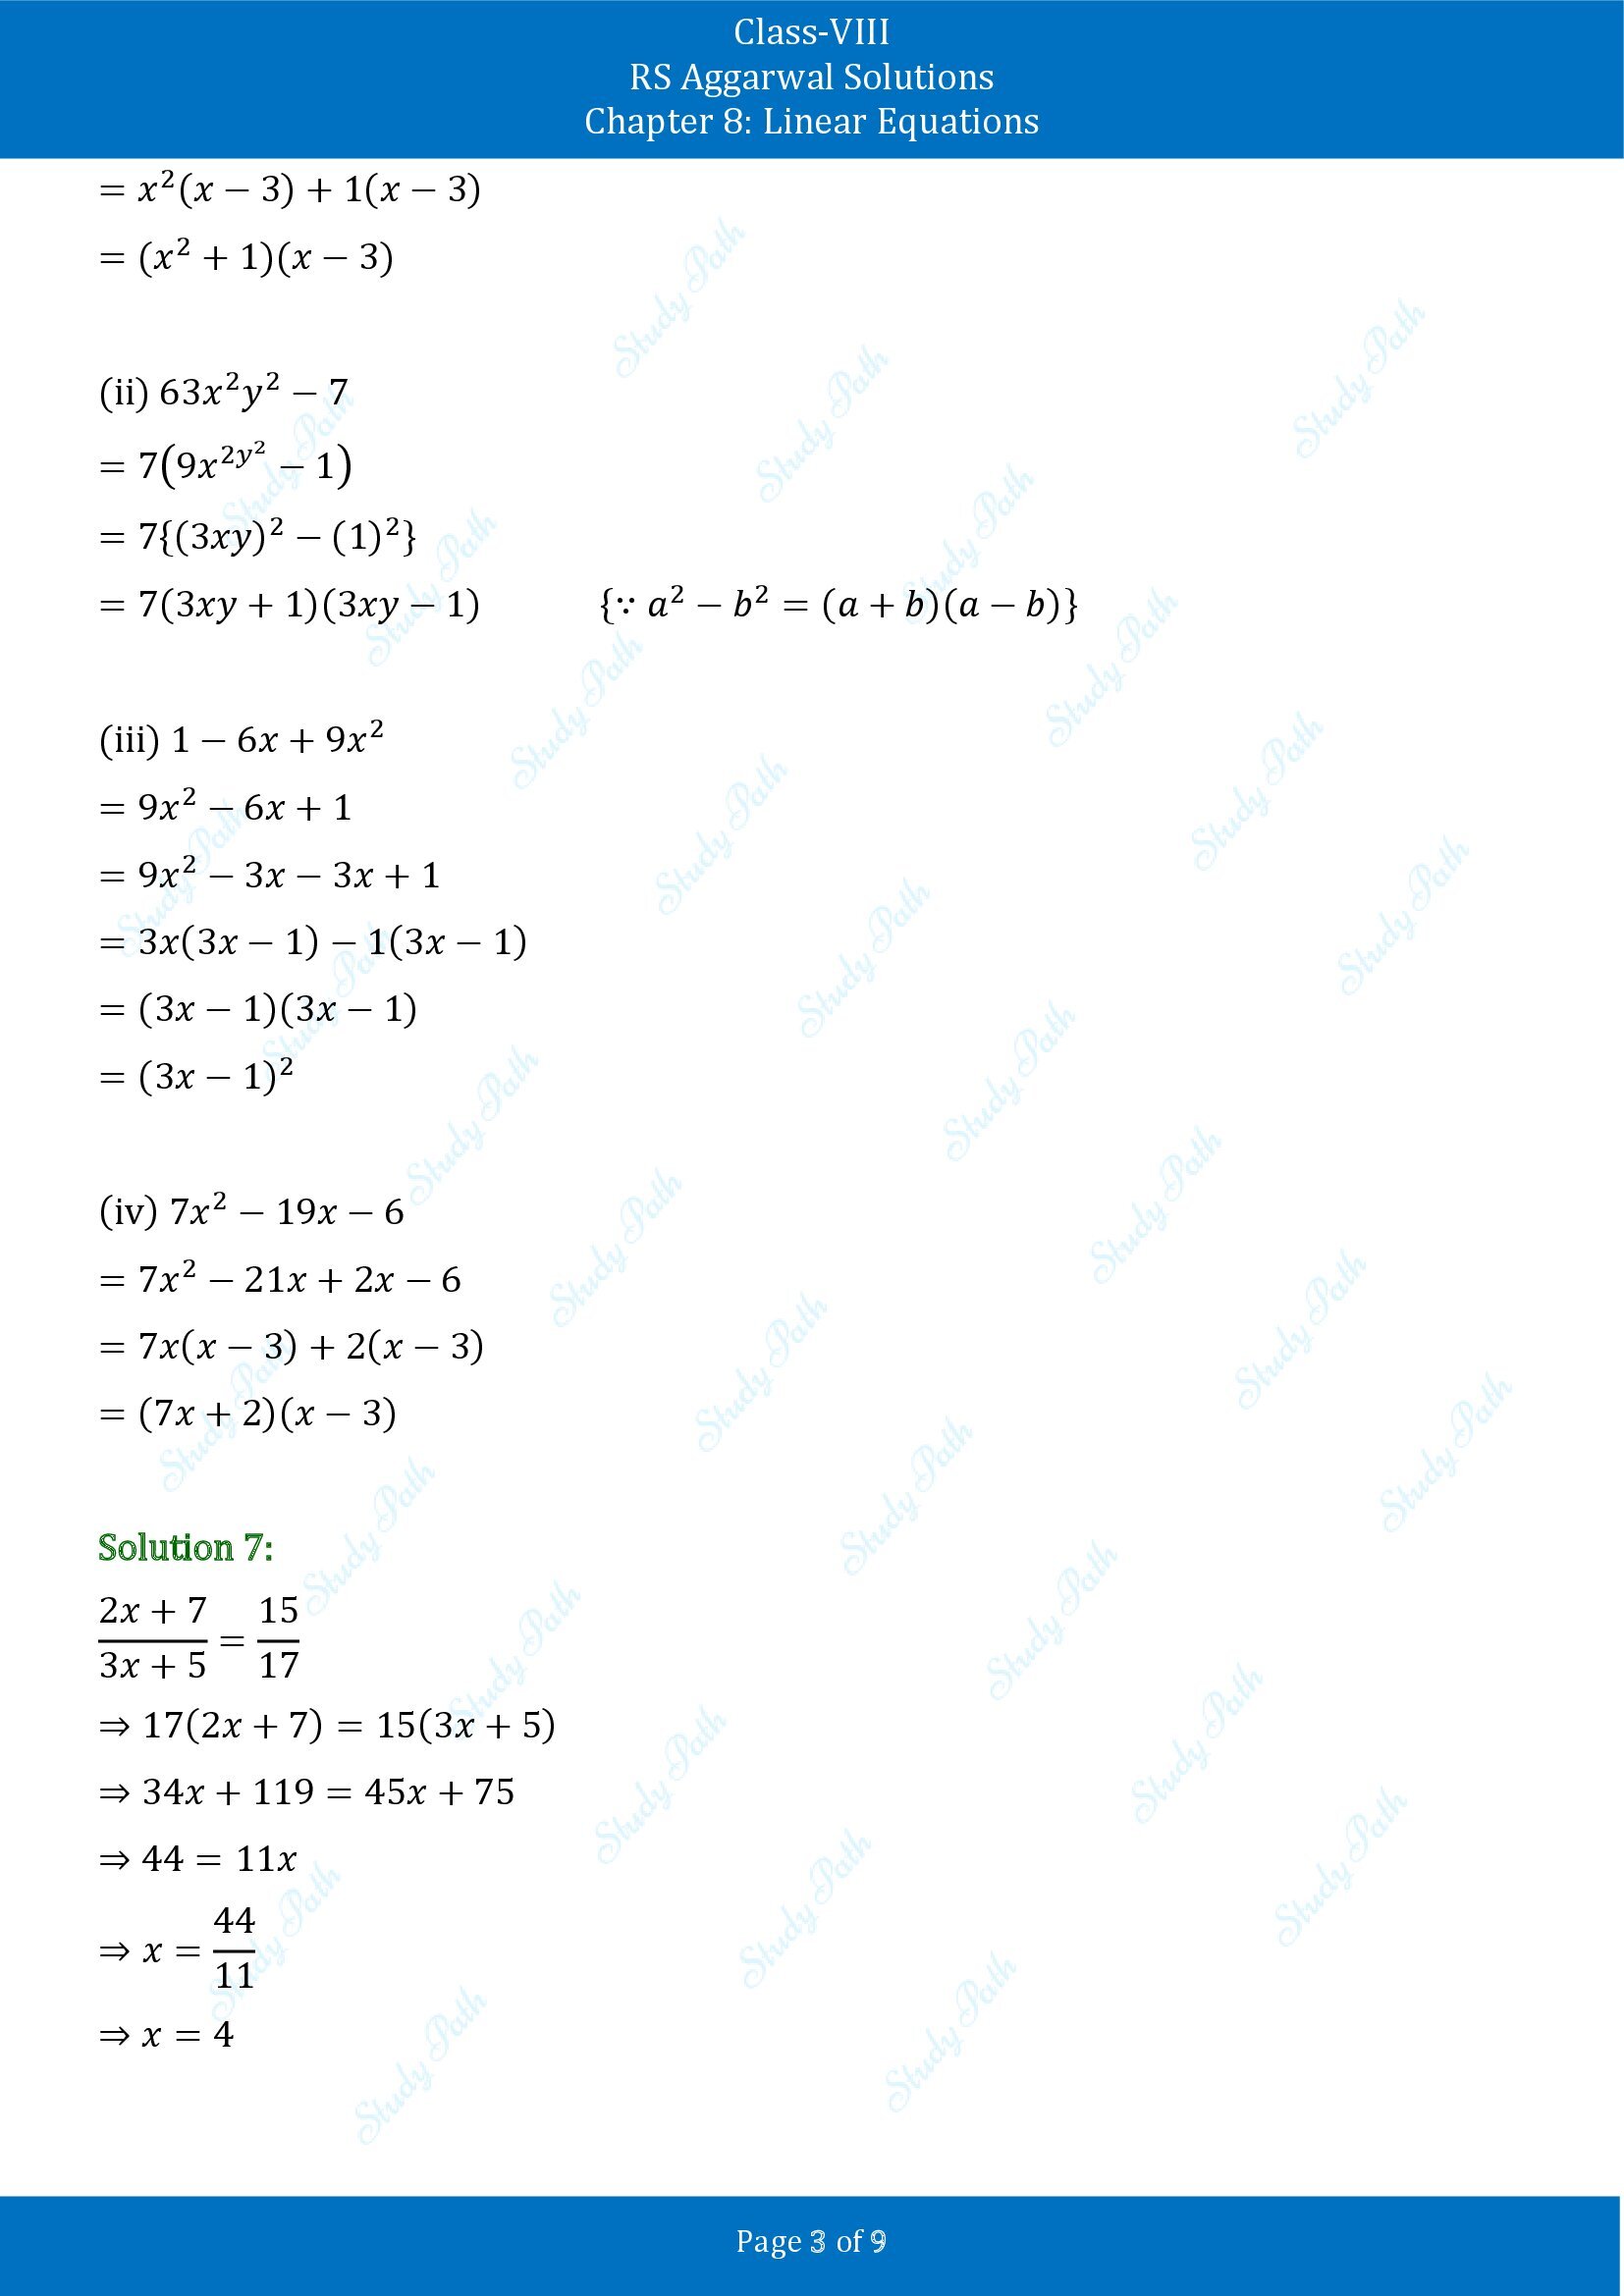 RS Aggarwal Solutions Class 8 Chapter 8 Linear Equations Test Paper 00003